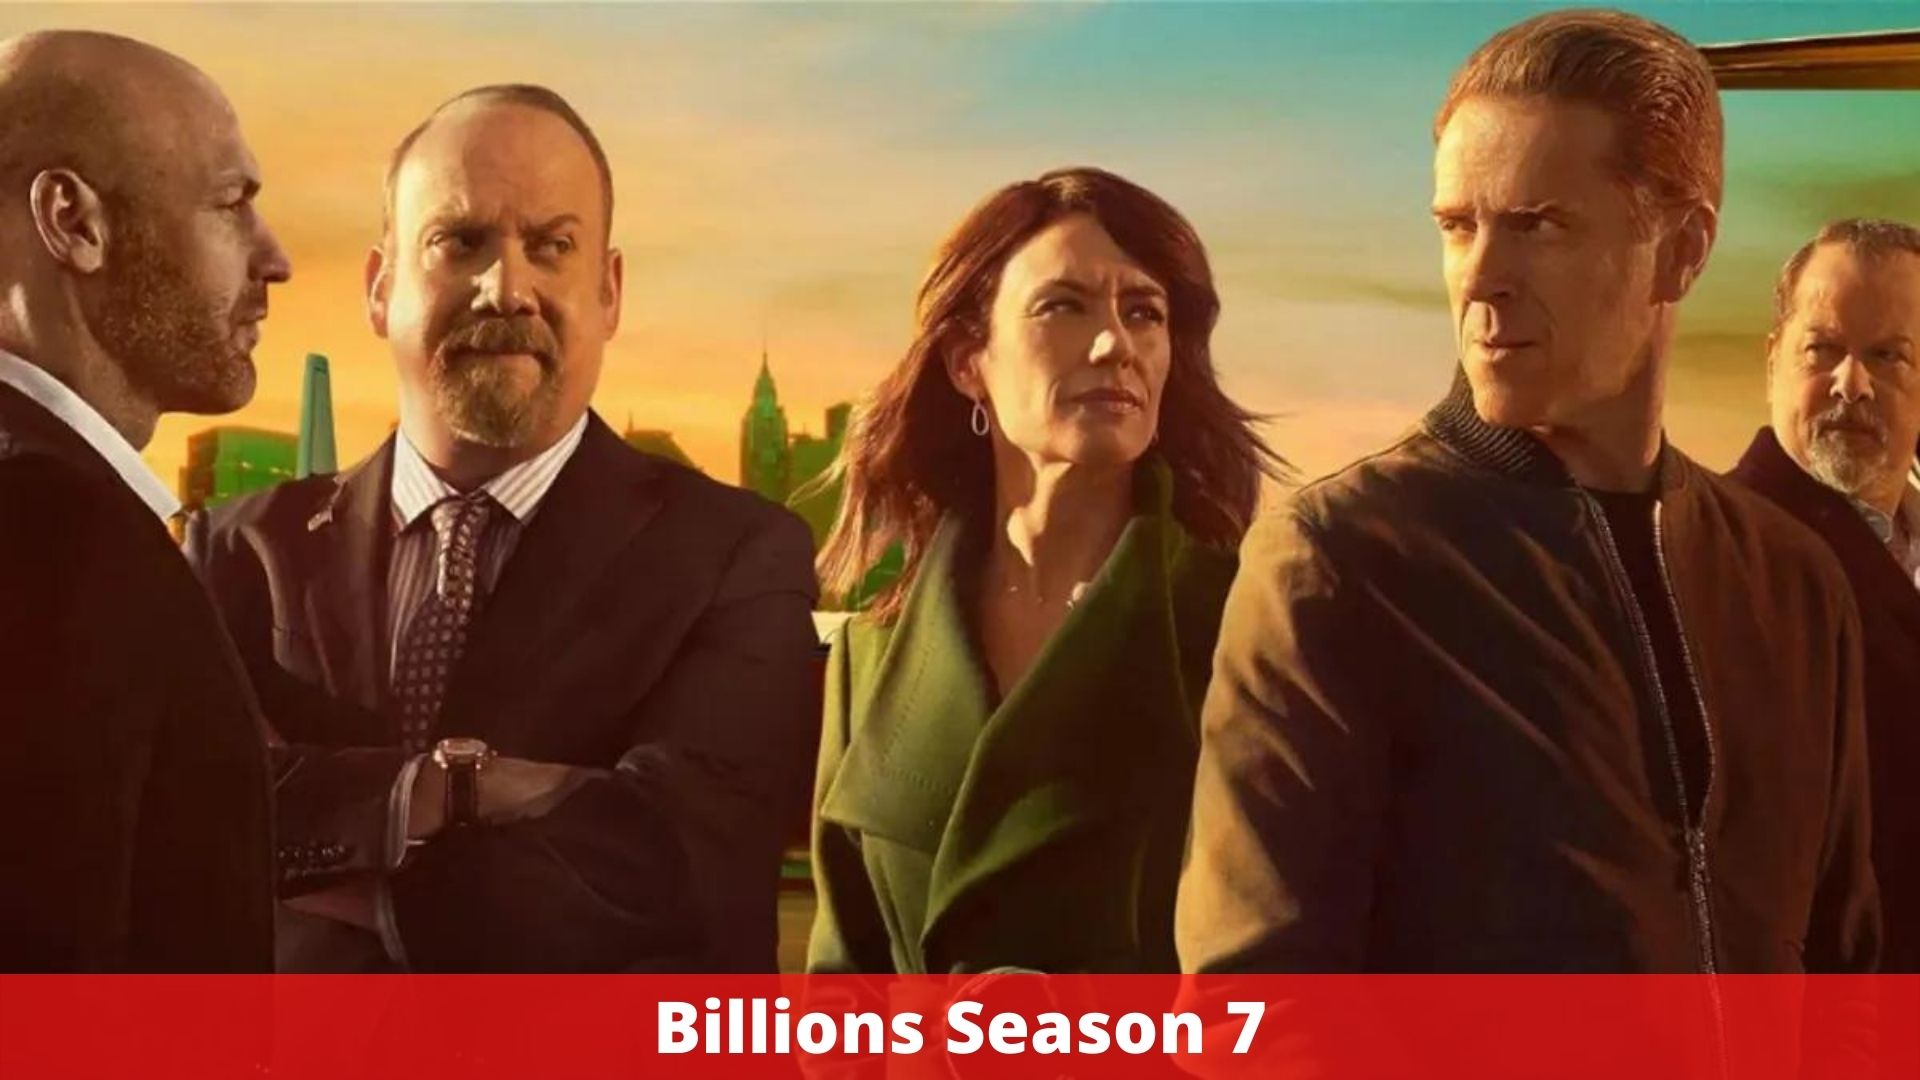 Billions Season 7 - Release Date, Cast, And Everything We Know!